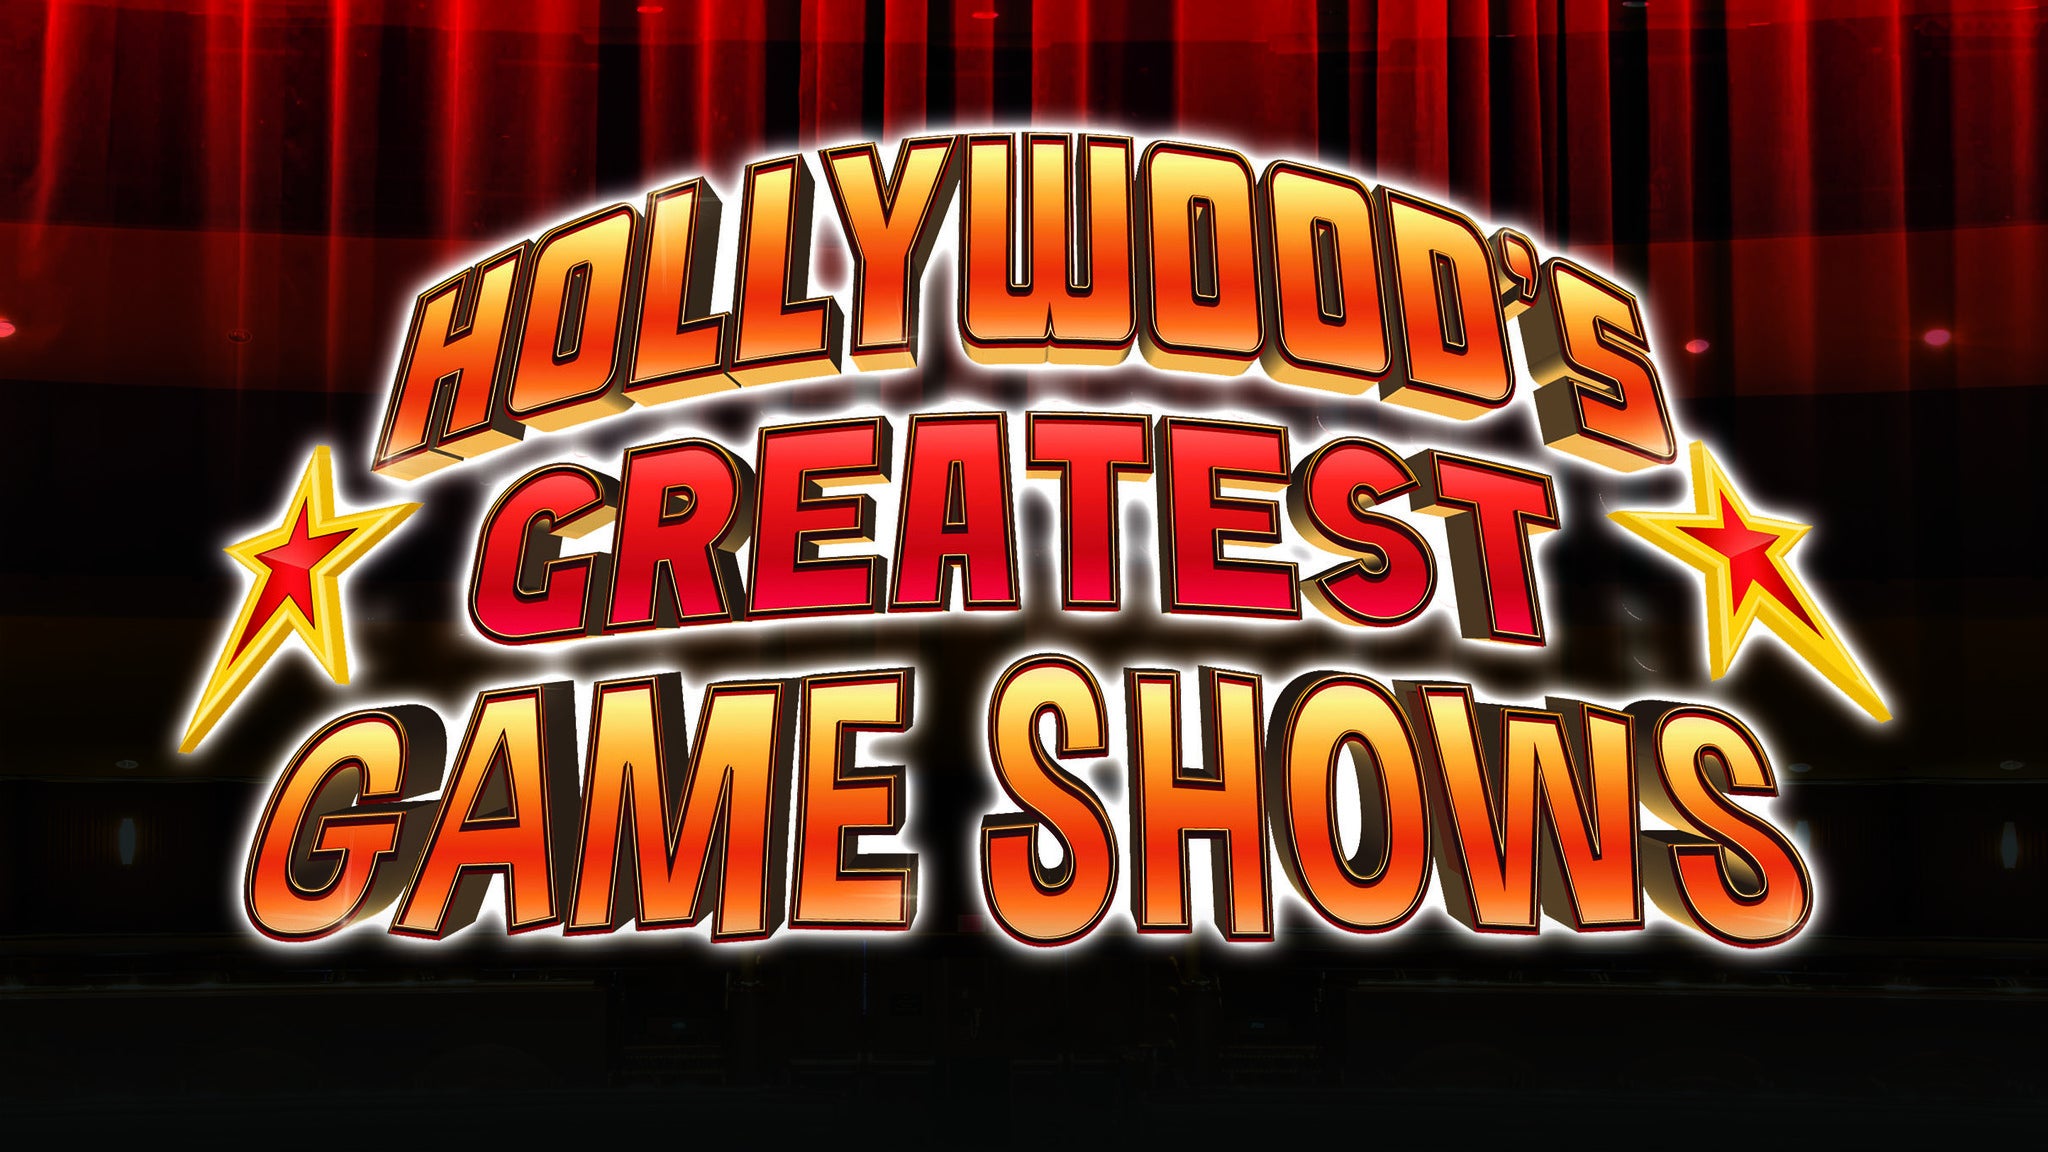 Hollywood's Greatest Game Shows Feat. Bob Eubanks in Reading promo photo for Exclusive presale offer code